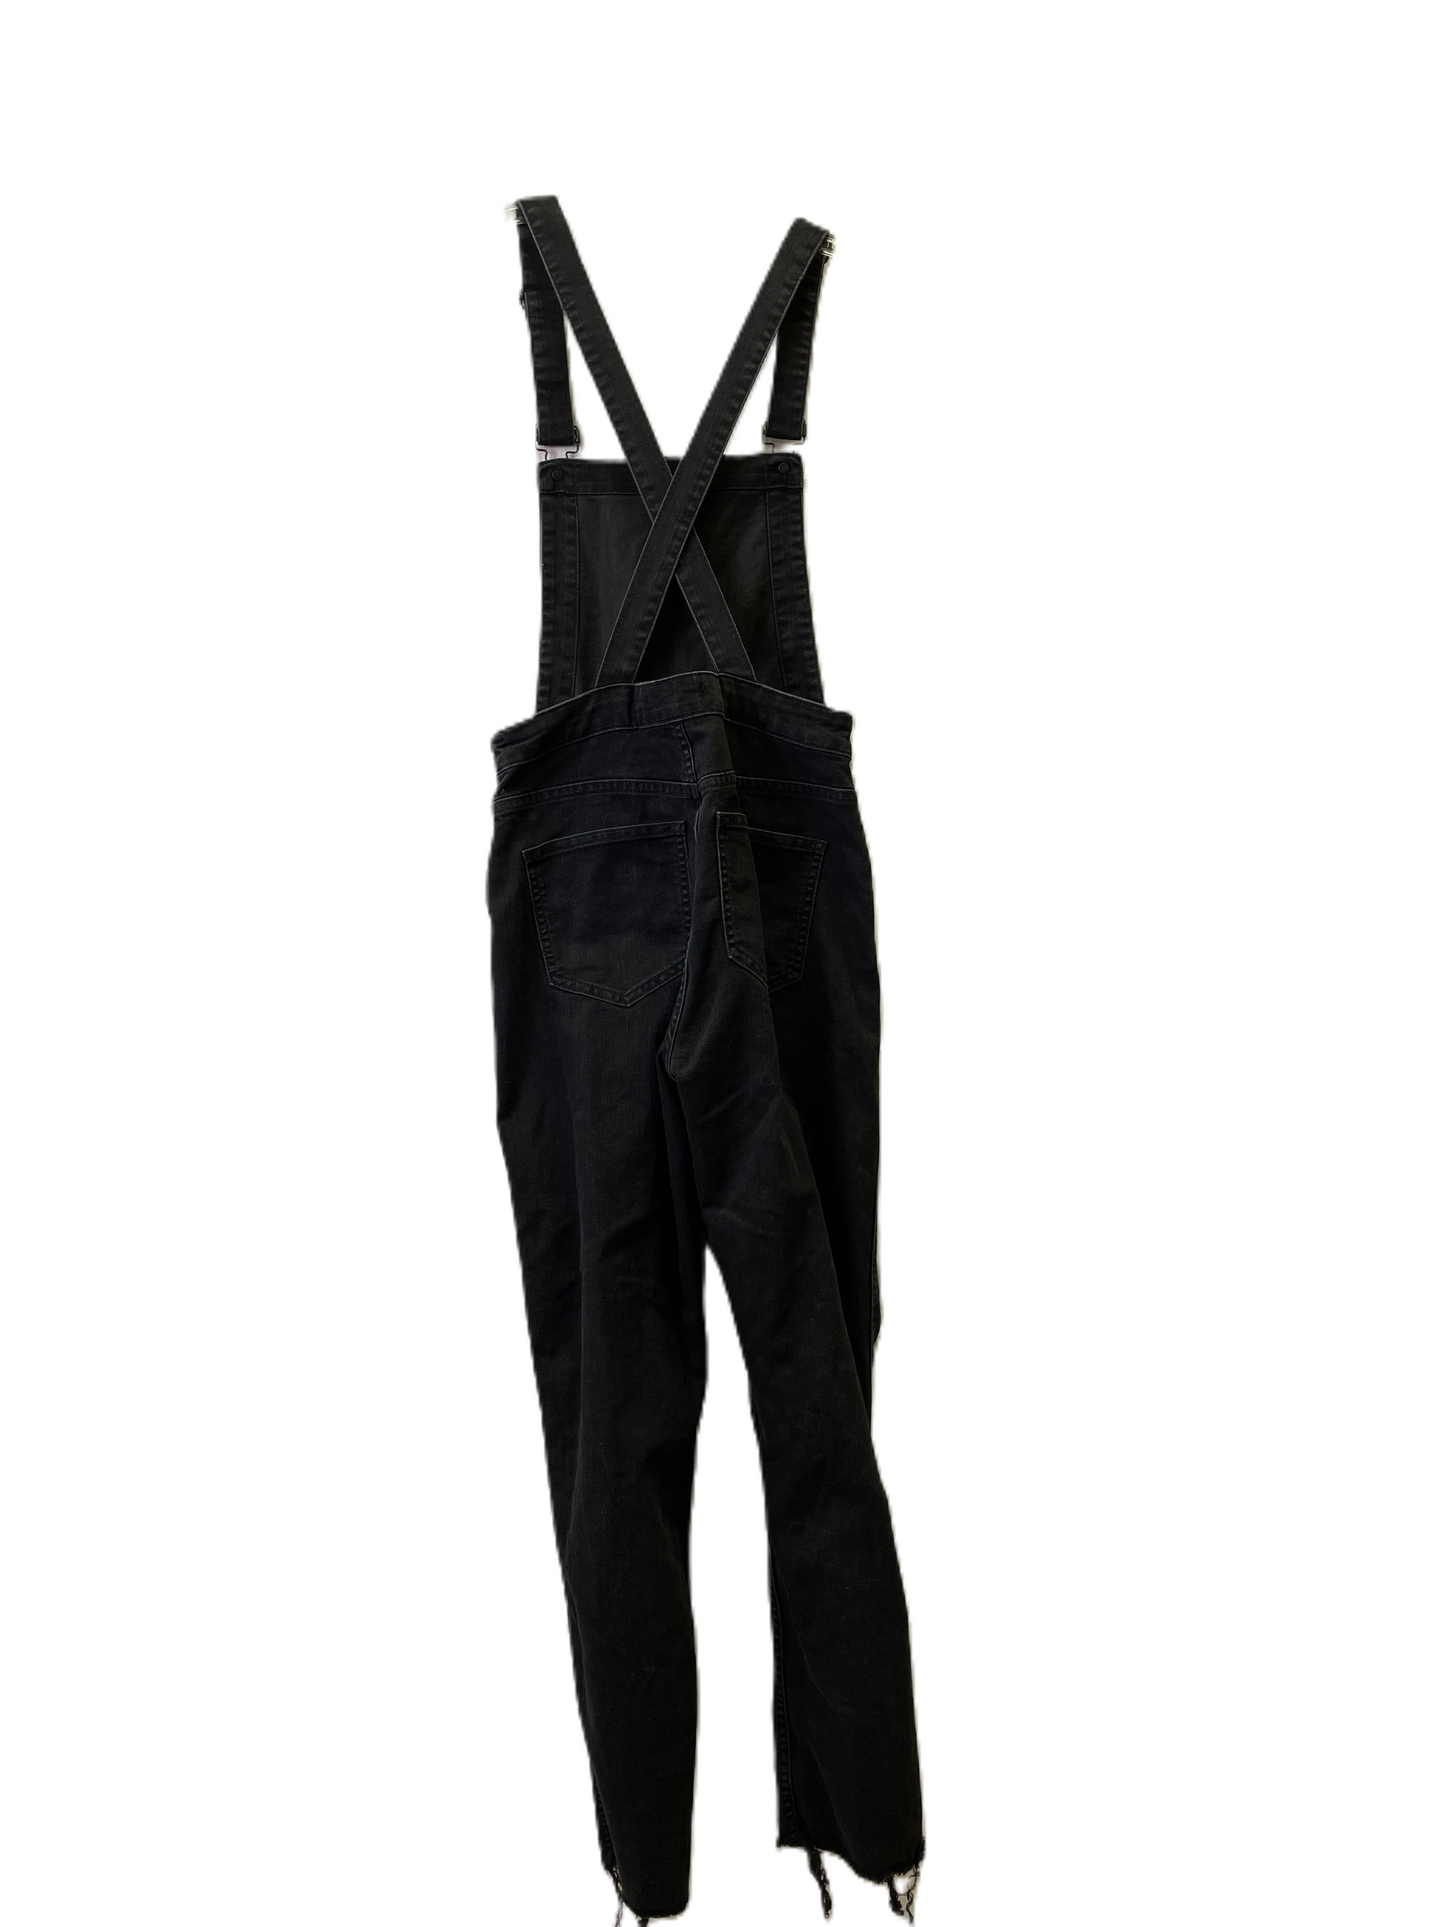 Black Denim Overalls By Madewell, Size: Xs